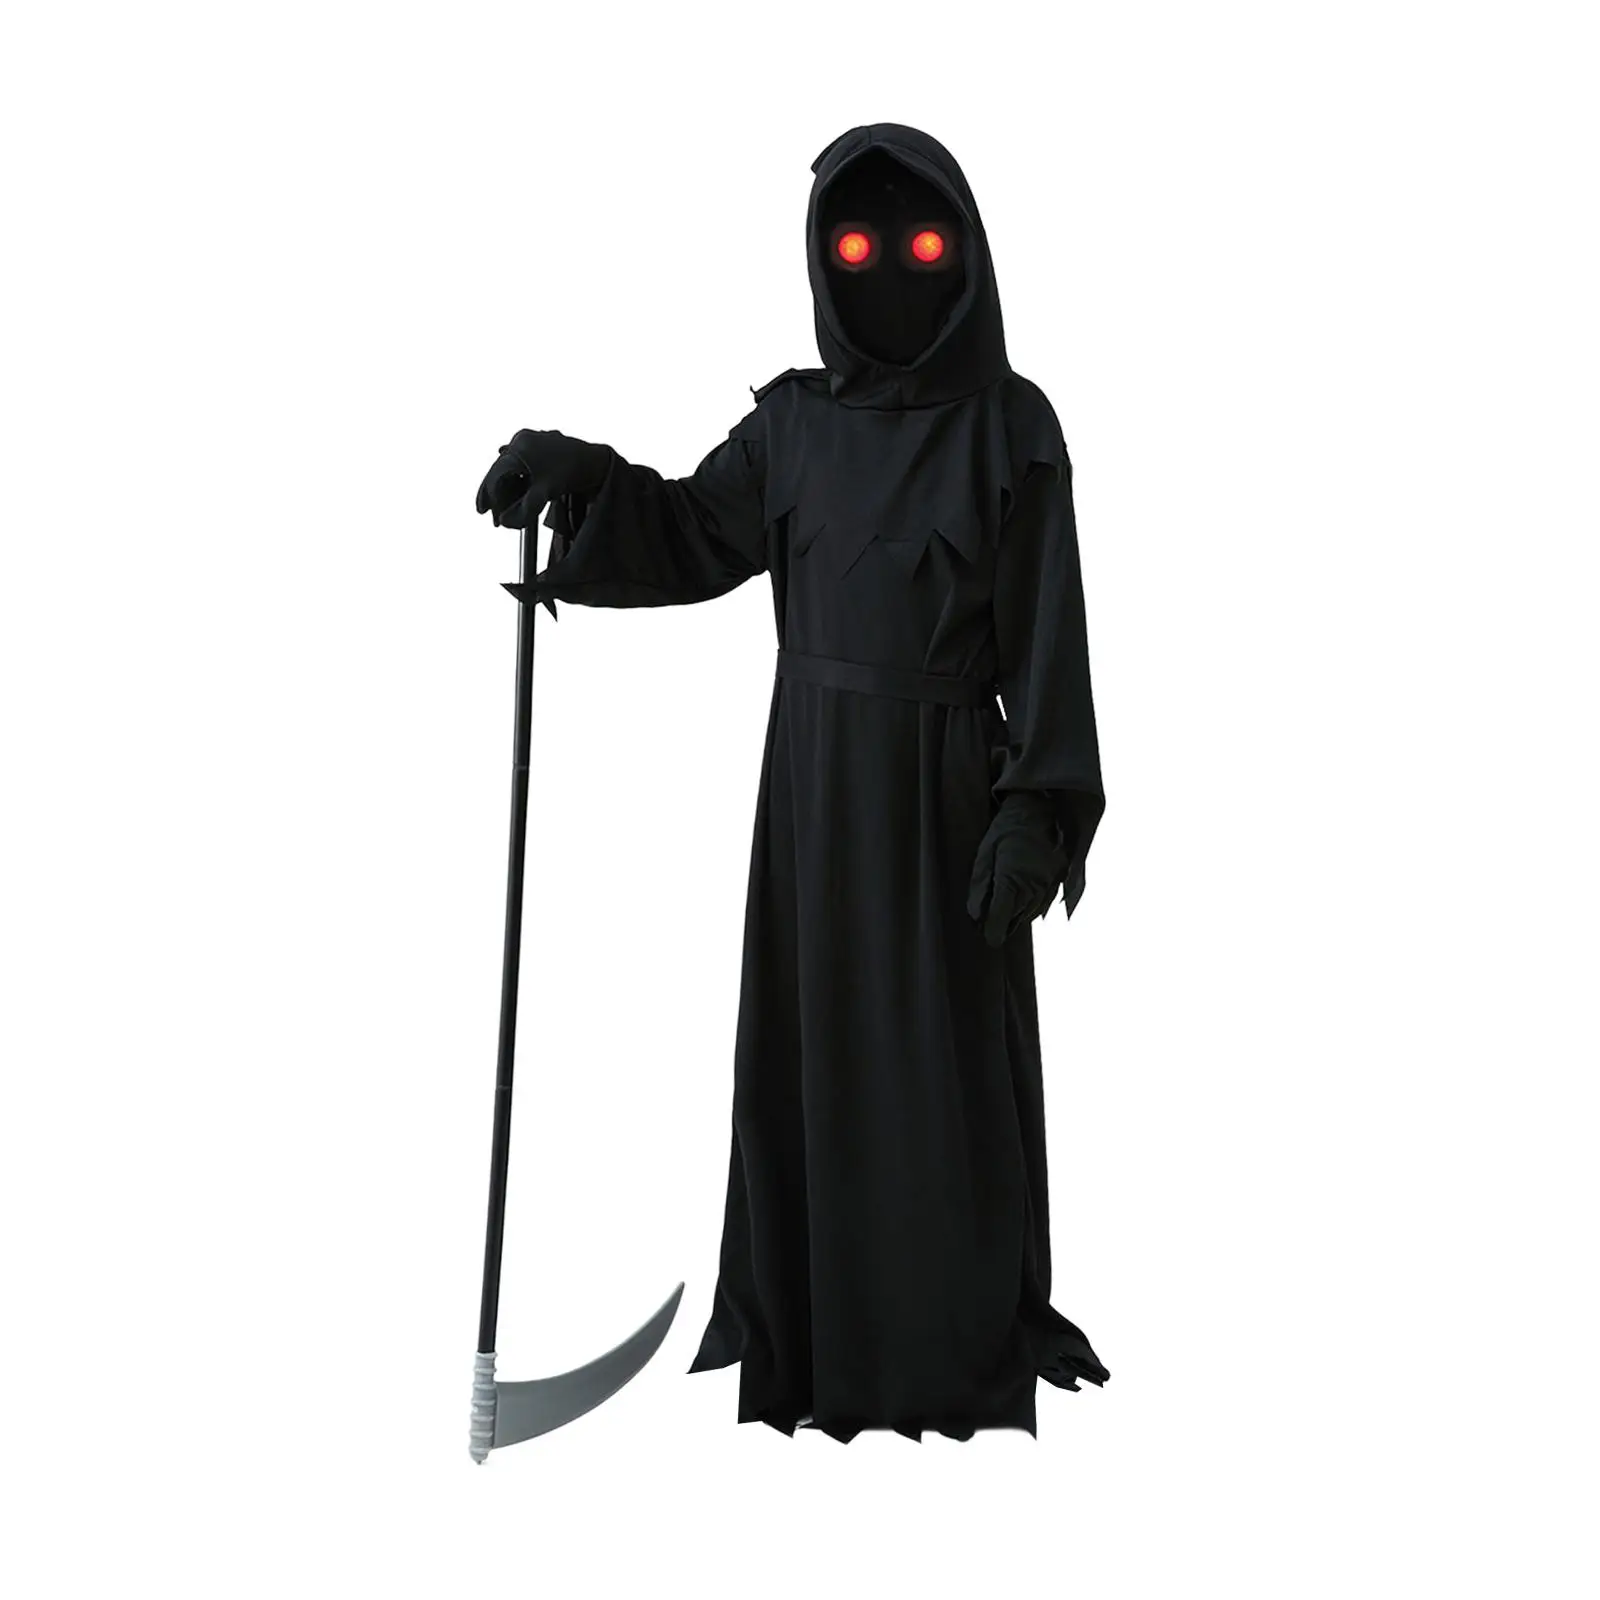 

Halloween Grim Reaper Costume Set Cosplay Scary Hood Grim Reaper Costume Robe with Glowing Red Eyes for Photo Props Party Favor